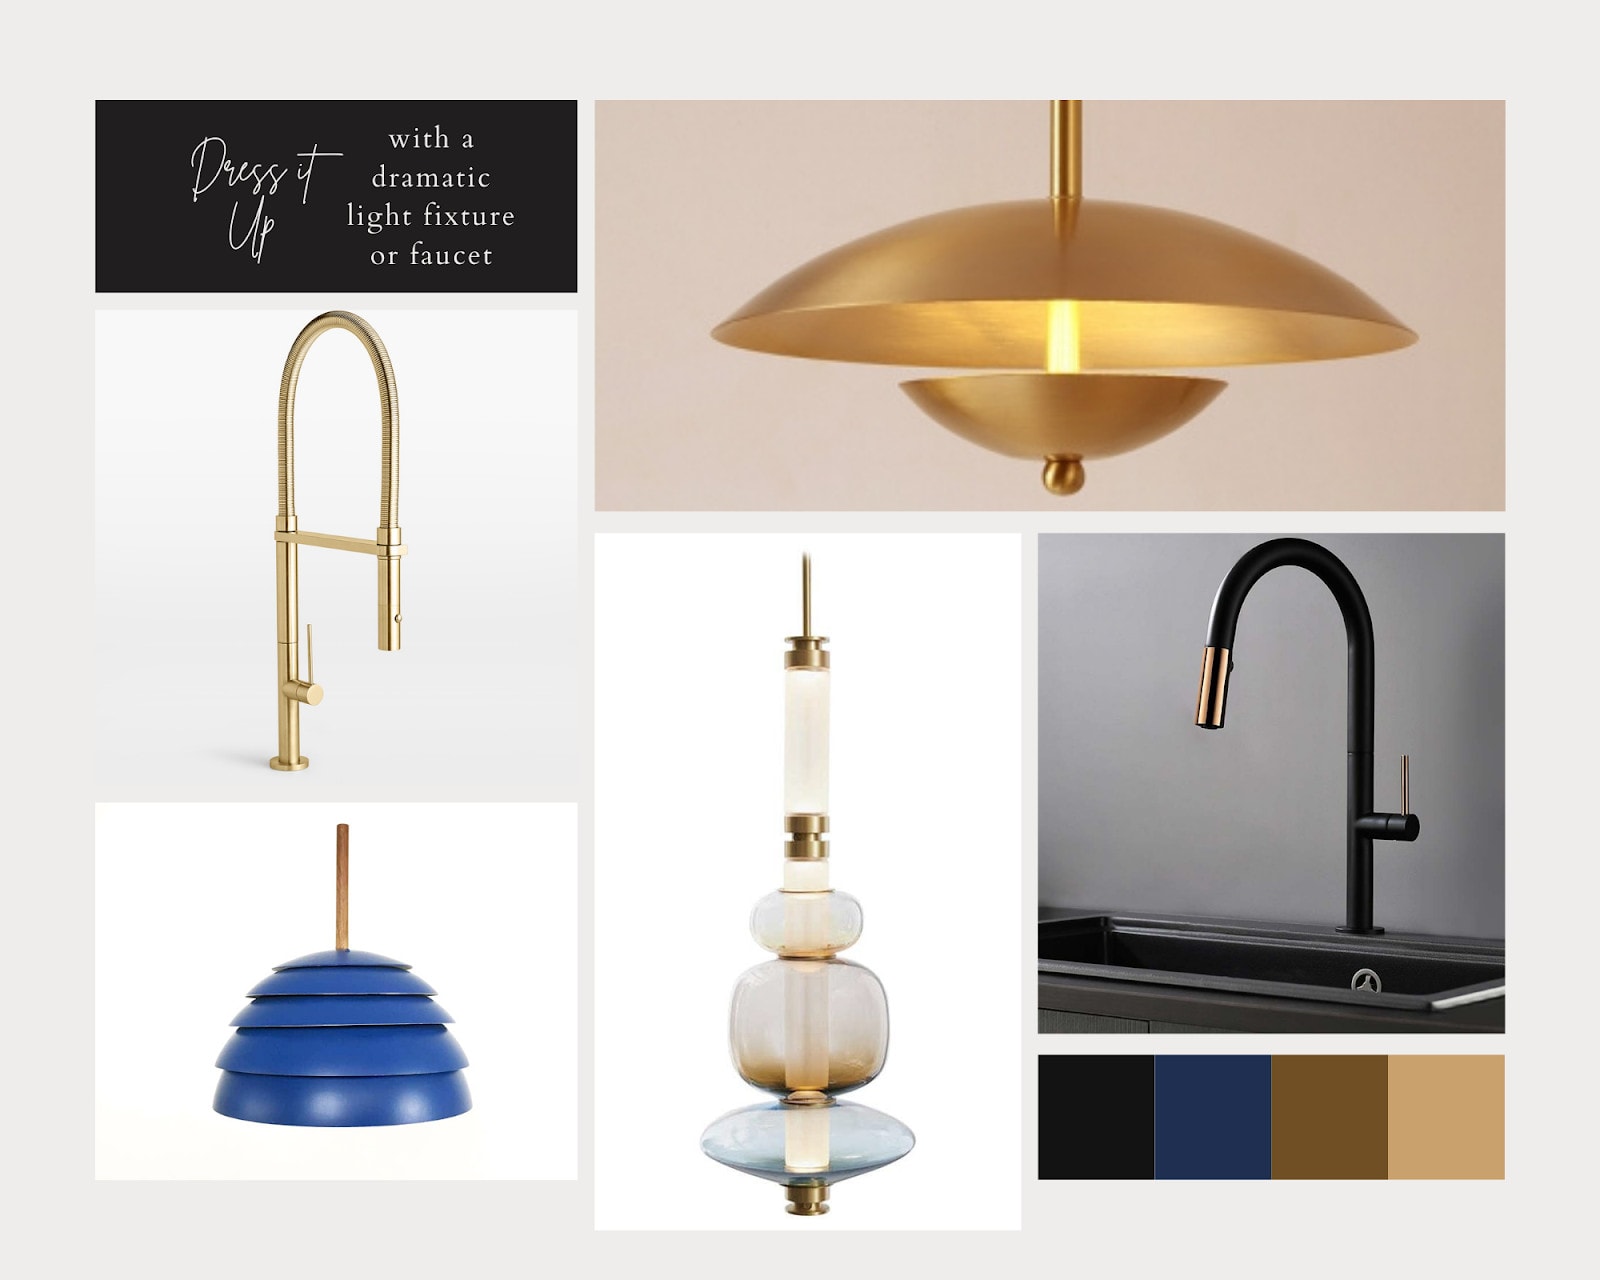 Faucets and light fixtures for laundry rooms at home